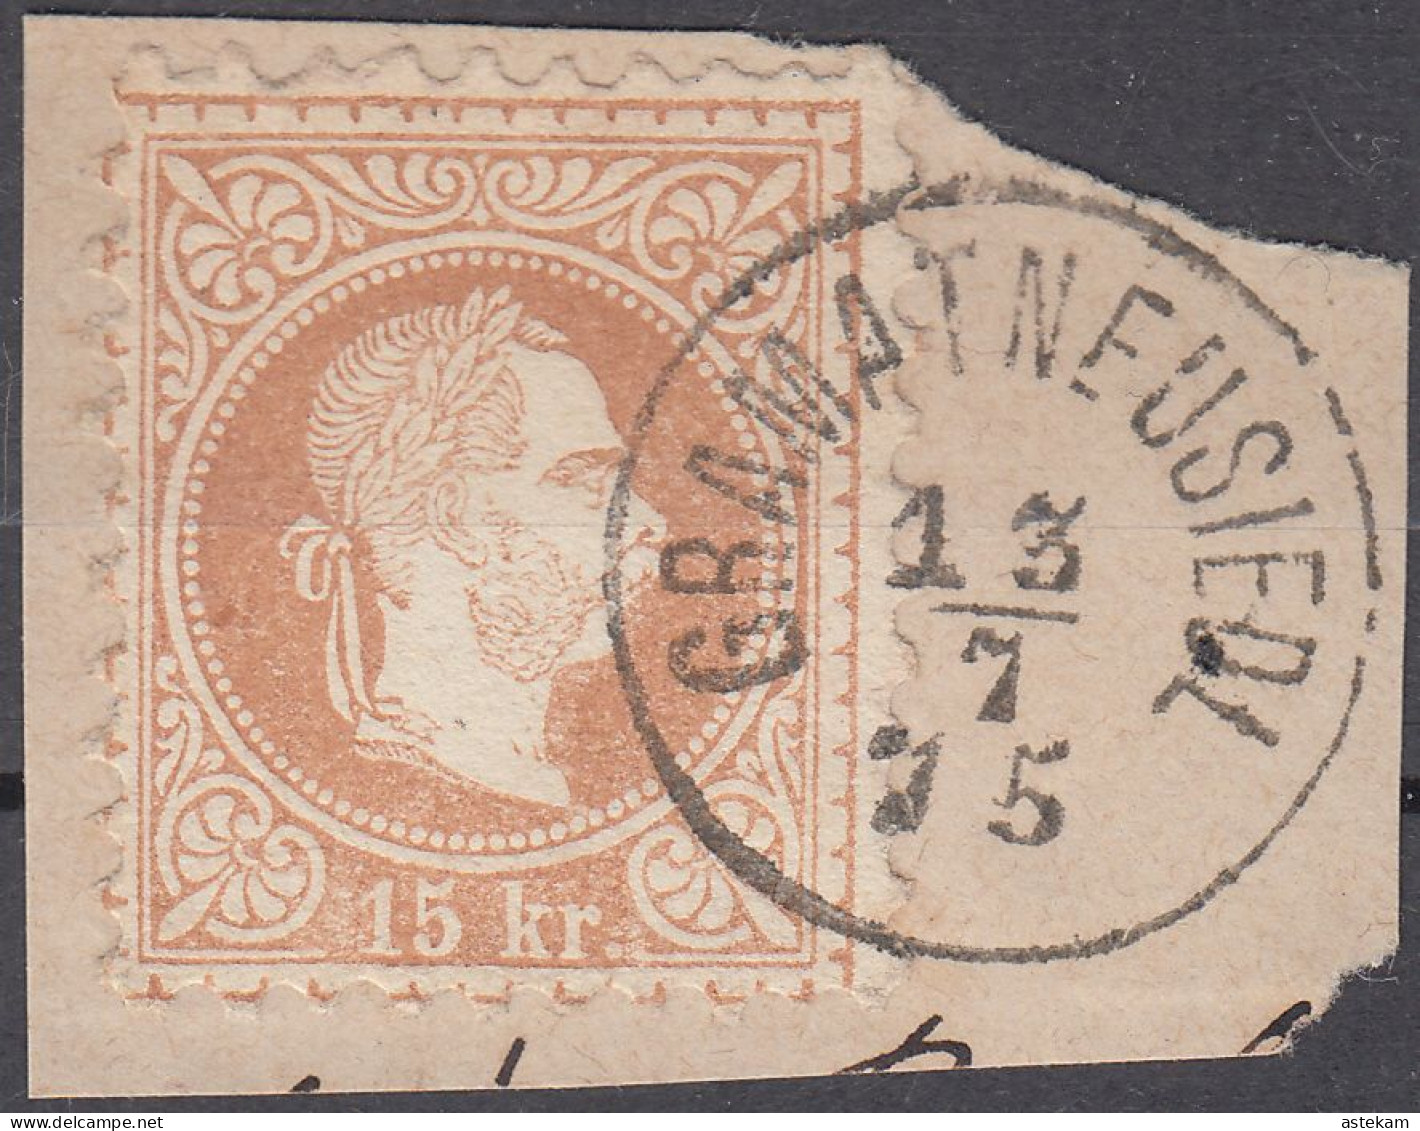 AUSTRIA 1867, KAISER FRANZ JOSEPH, MiNo 39IIA, SEPARATE USED STAMPS From 15.oo KROUZERS With LETTER FRAGMENT - Usados